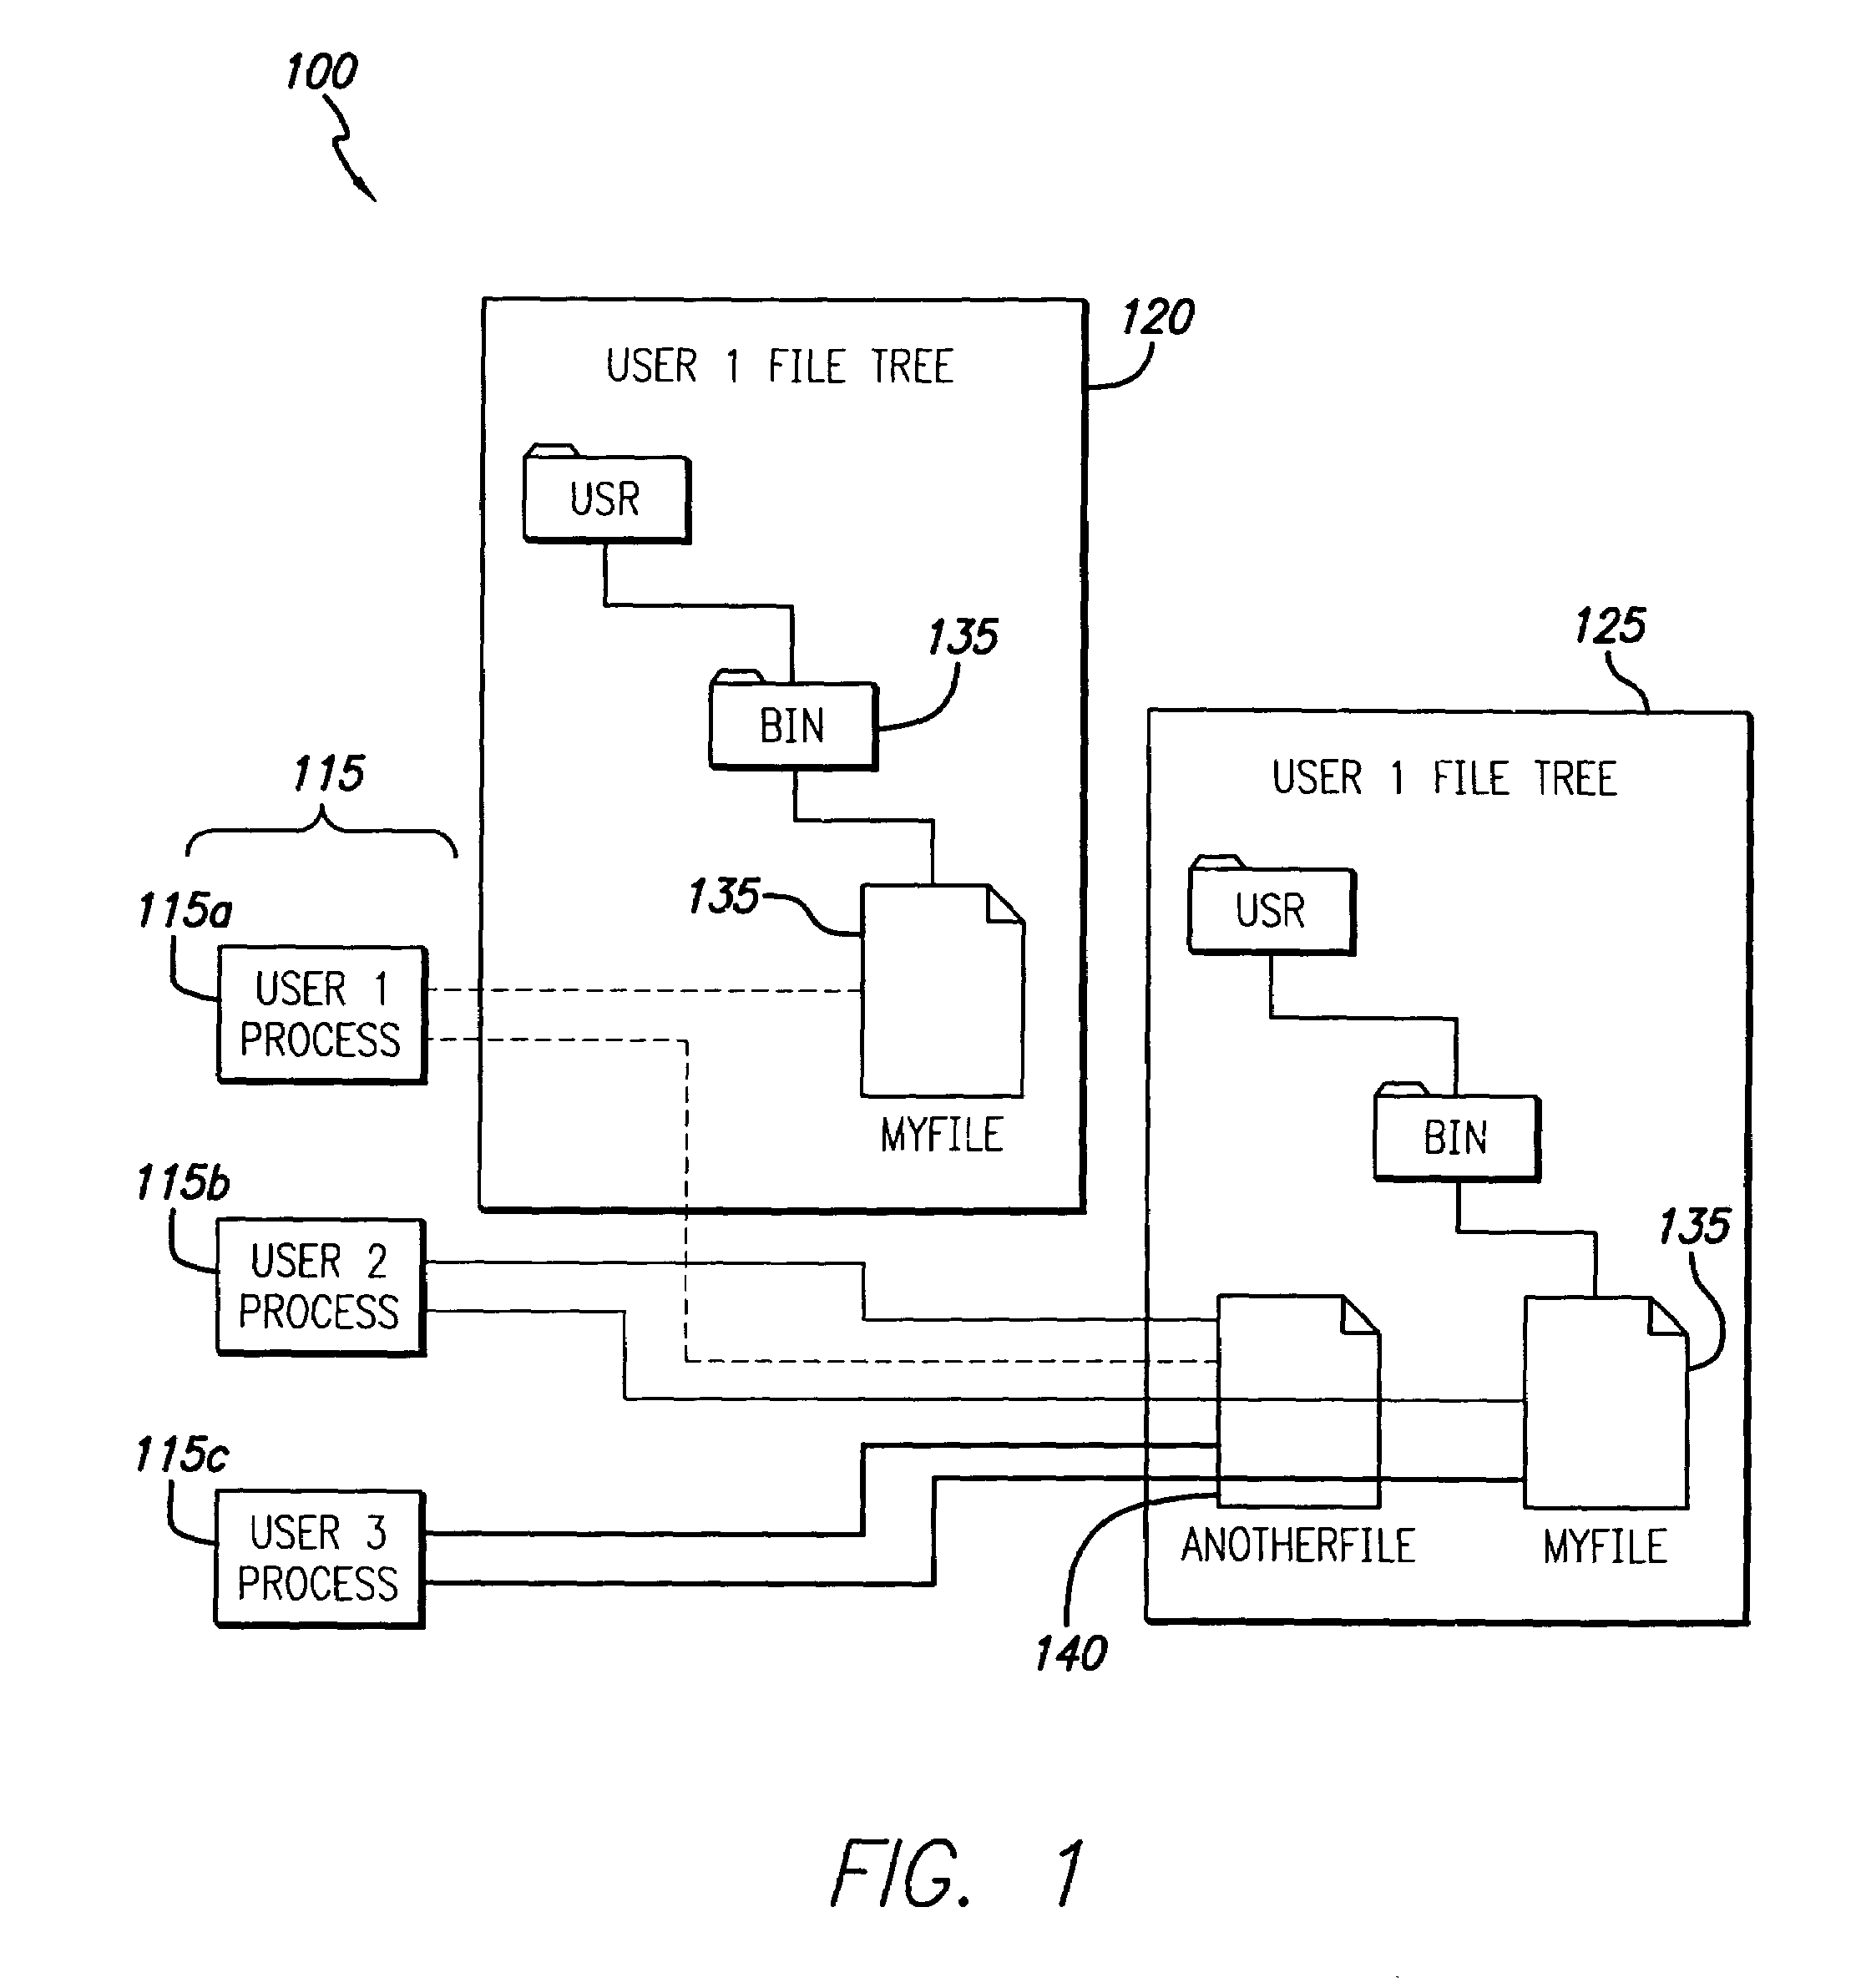 System and method for providing effective file-sharing in a computer system to allow concurrent multi-user access